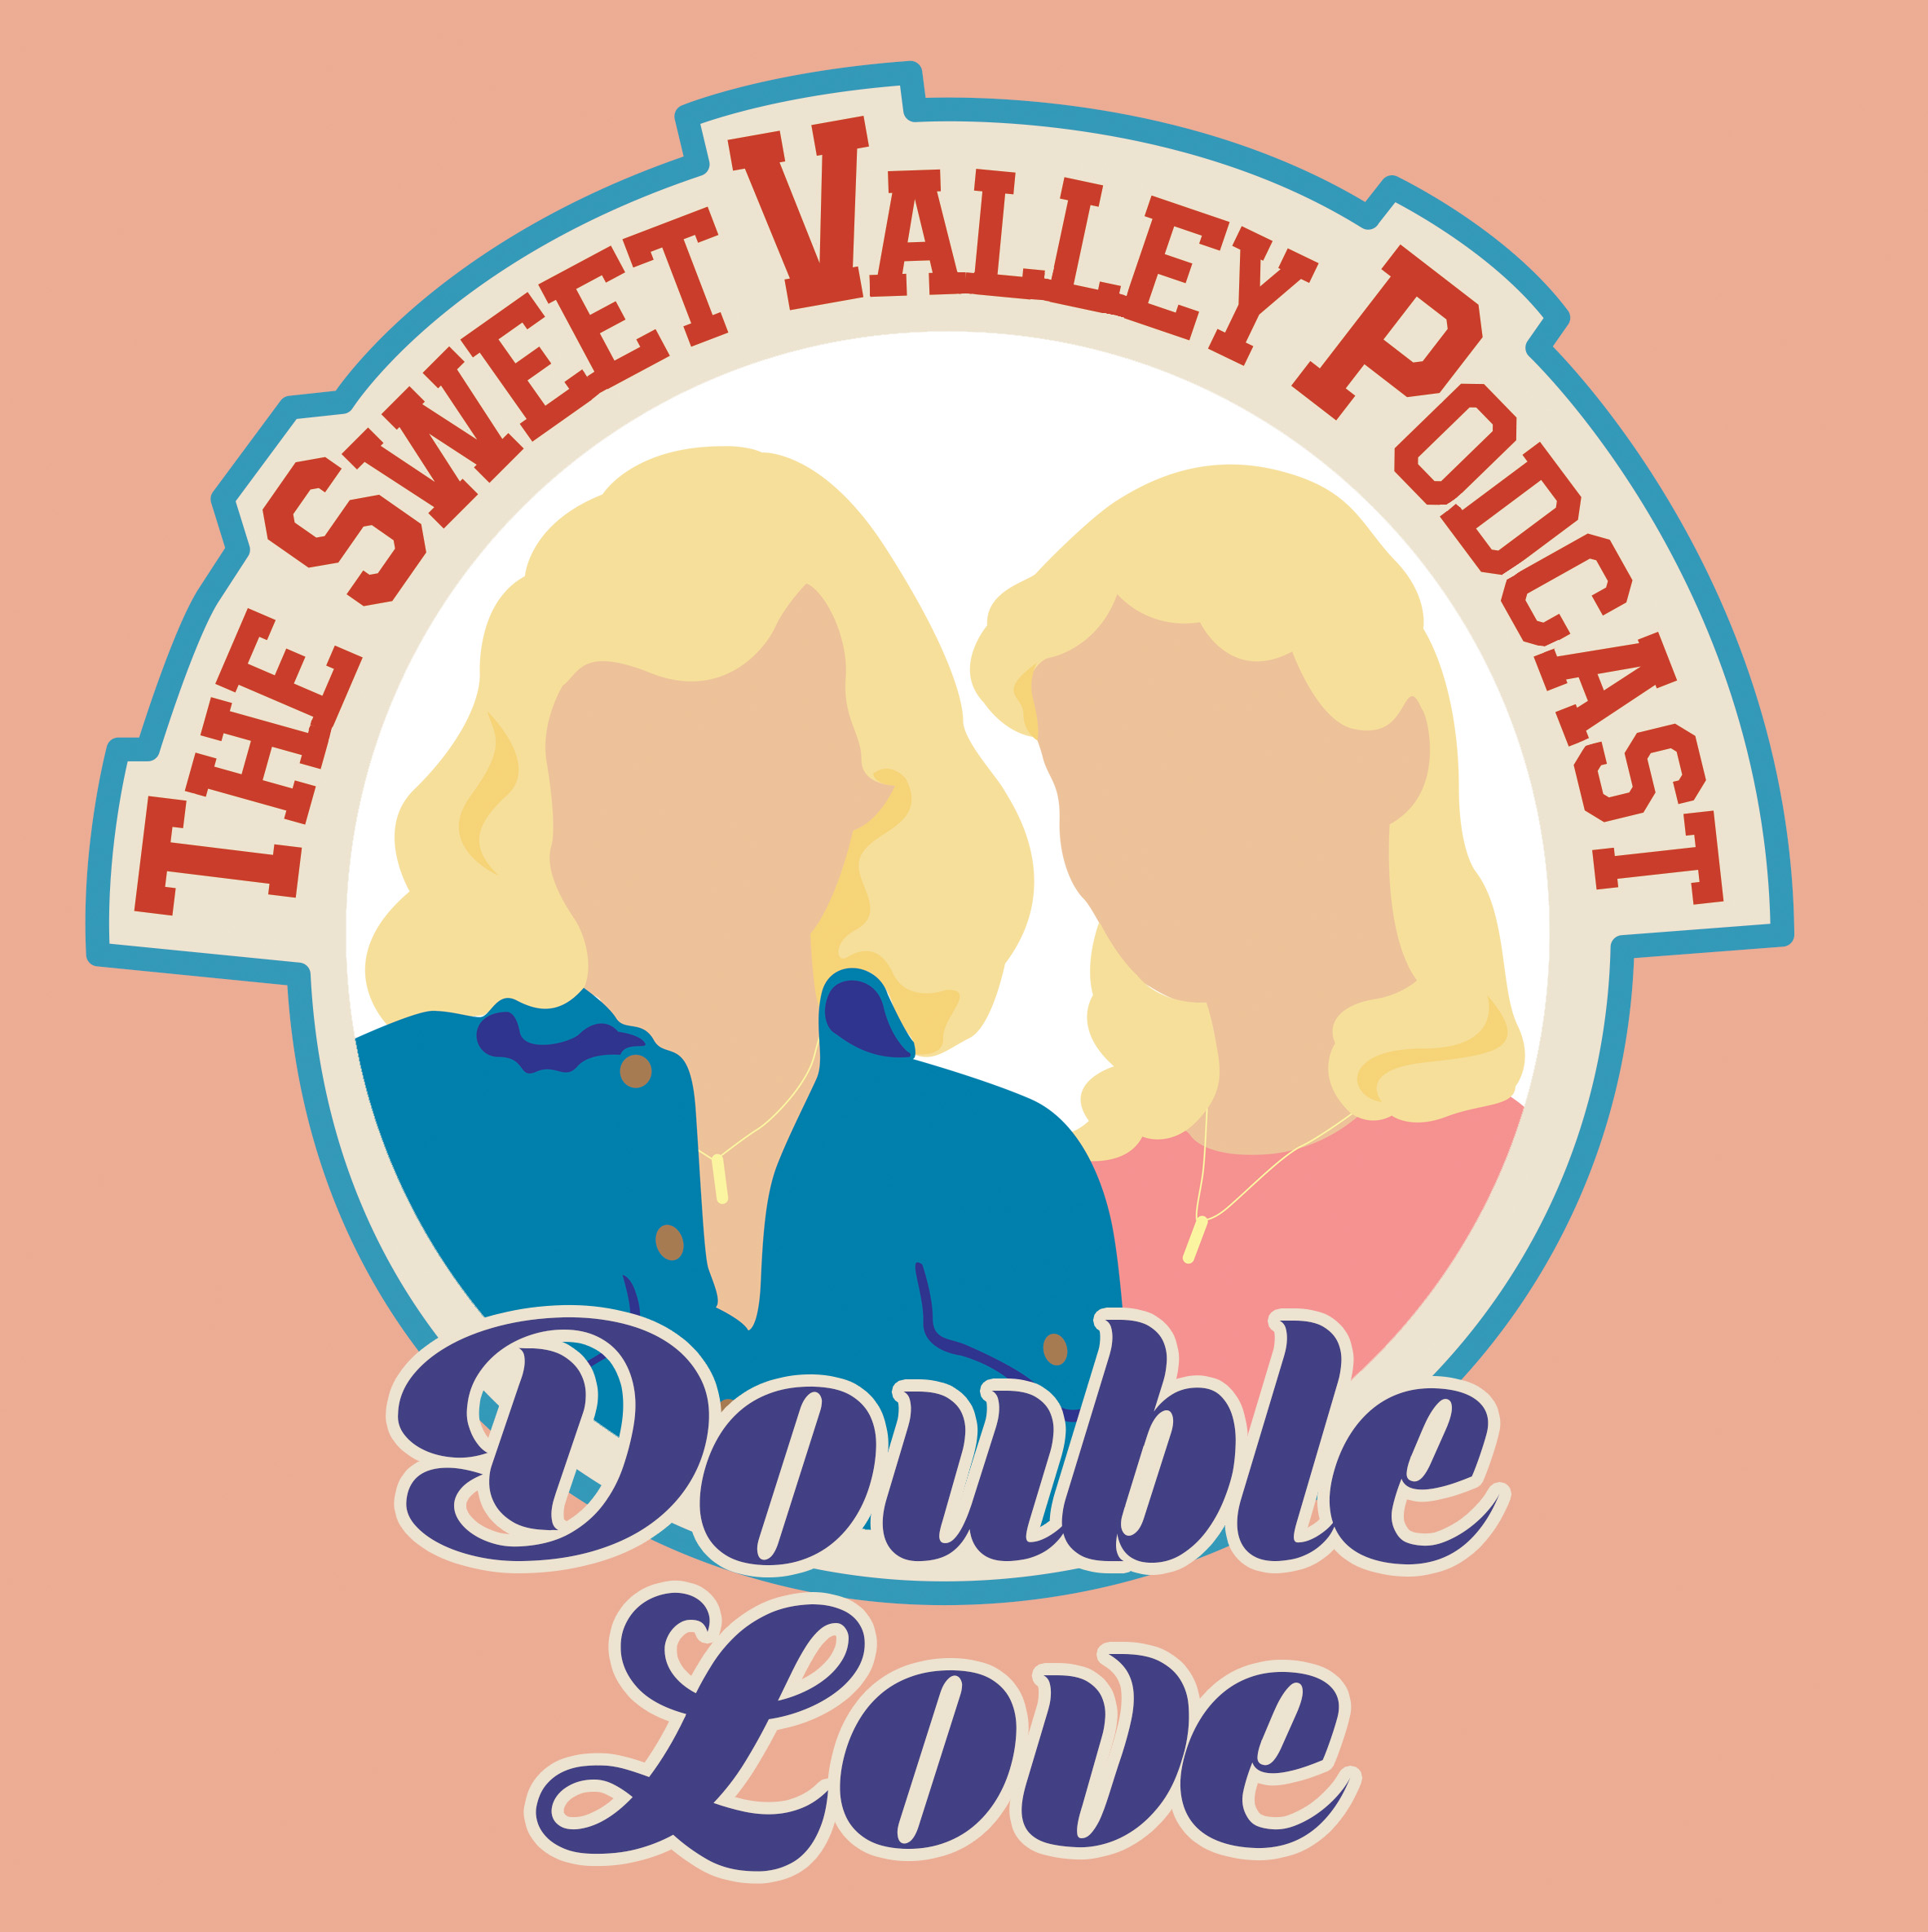 DOUBLE LOVE: FROM HERE TO SWEET VALLEY PART 2 podcast artwork